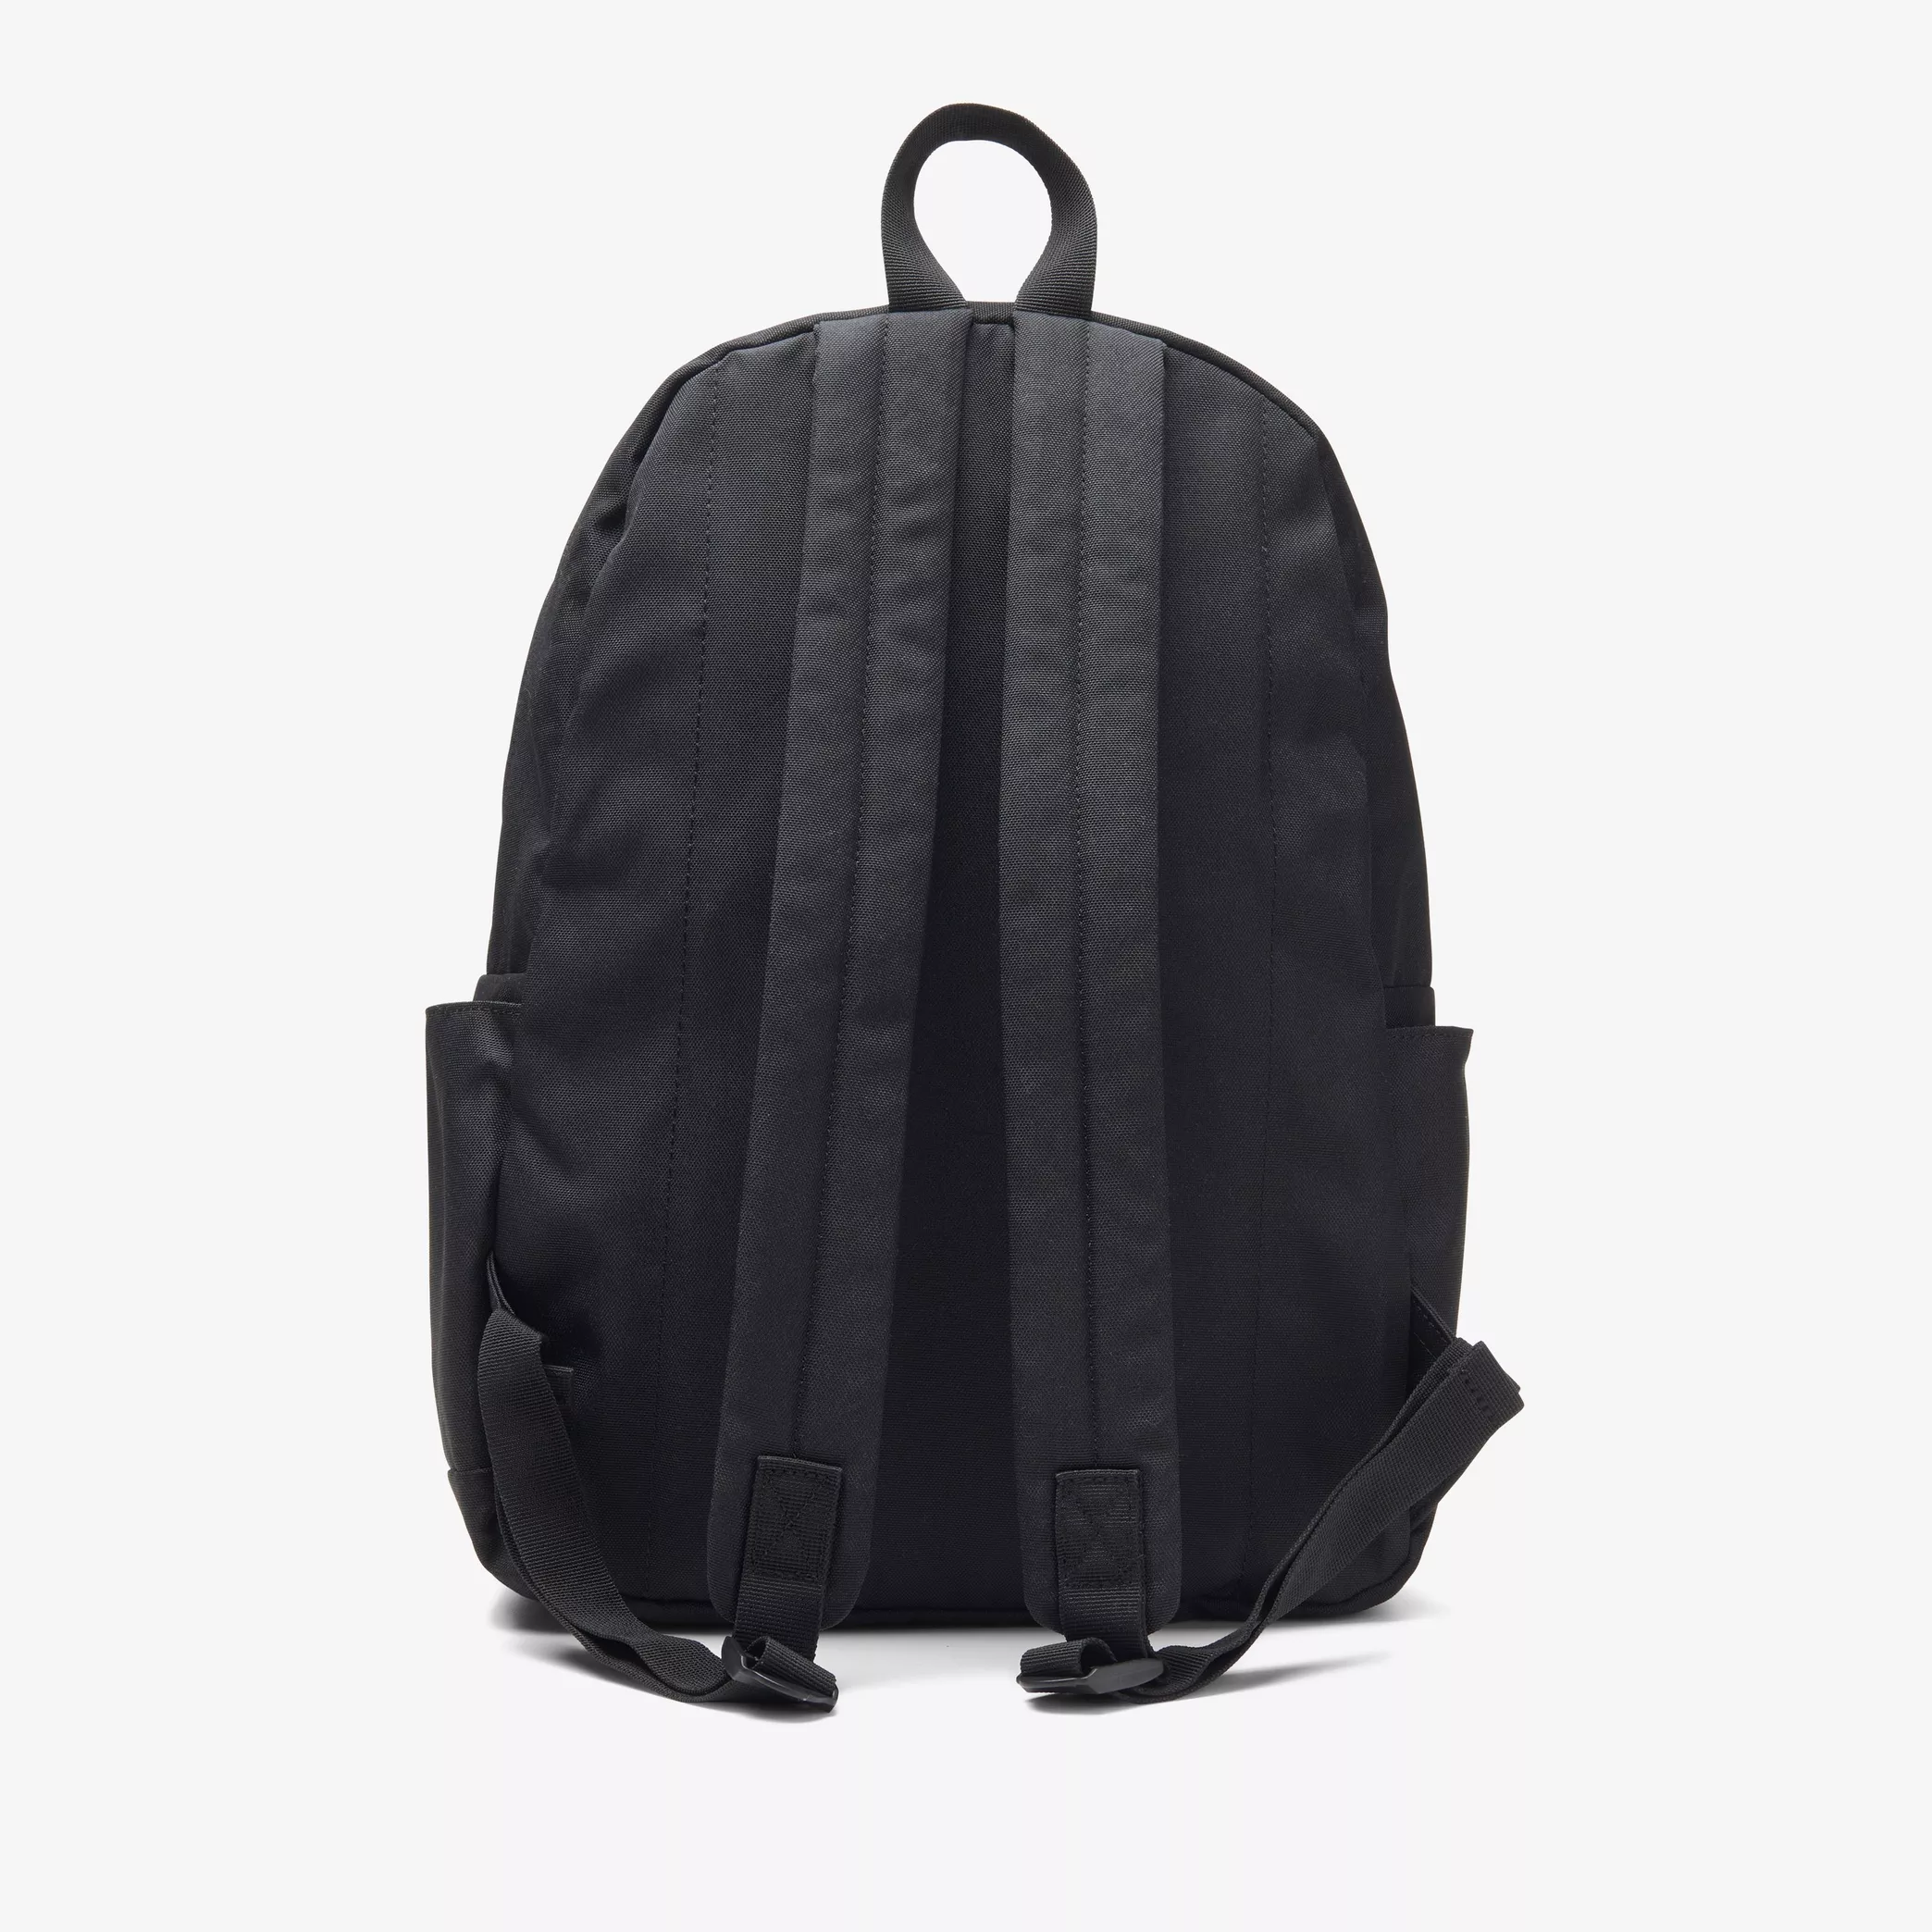 Cra-wallonieShops 4505 0012013359.01.0002 running backpack with puffer  quilting detail | Clarks Wallabee Boot Arrives in 